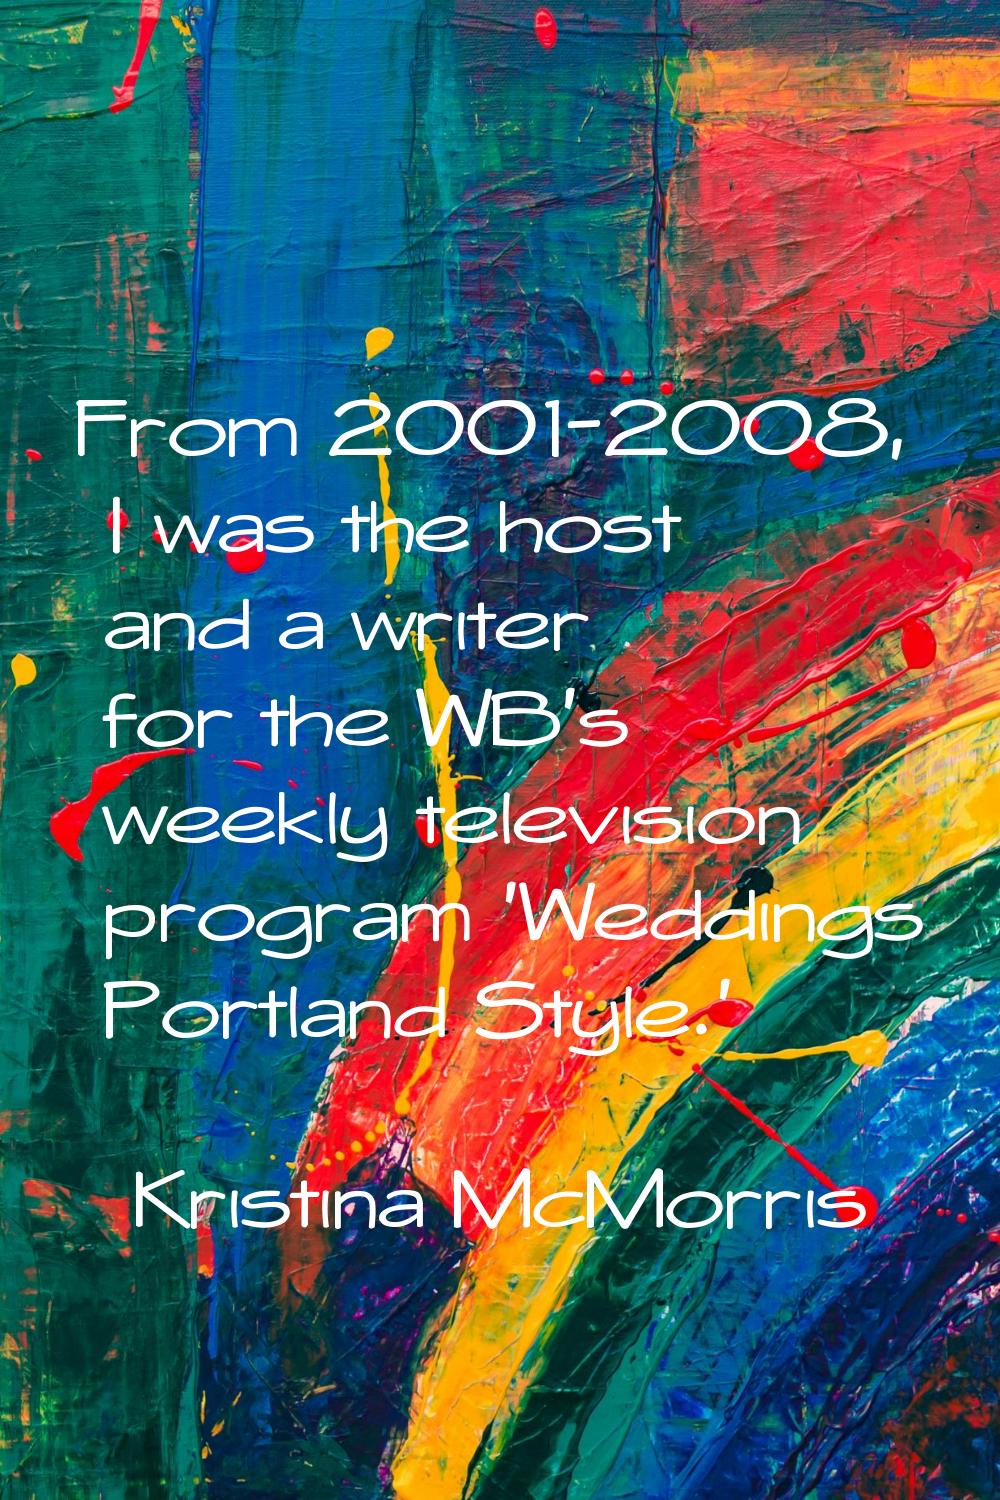 From 2001-2008, I was the host and a writer for the WB's weekly television program 'Weddings Portla